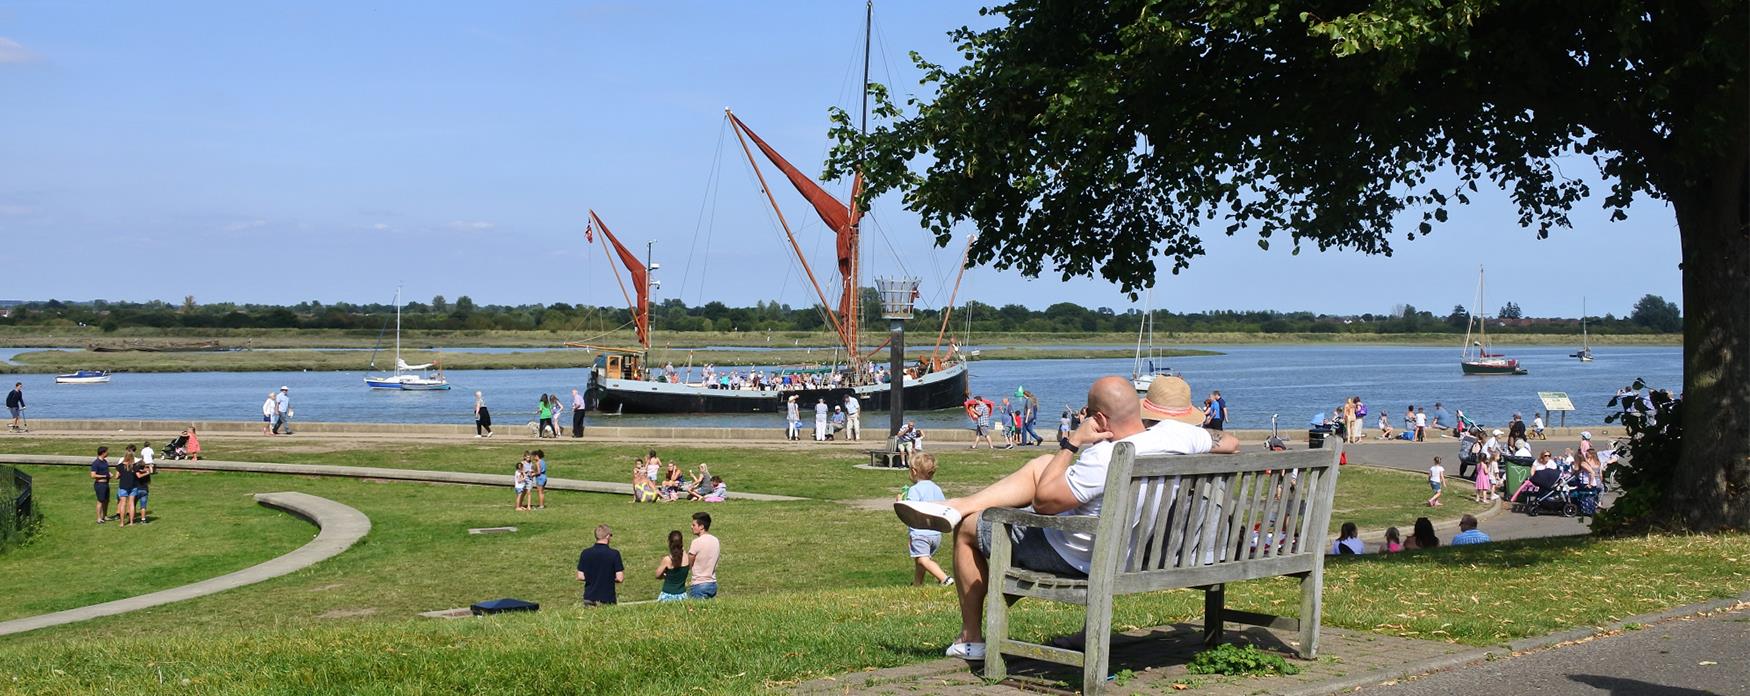 People sitting in the park, with the river Blackwater in the background